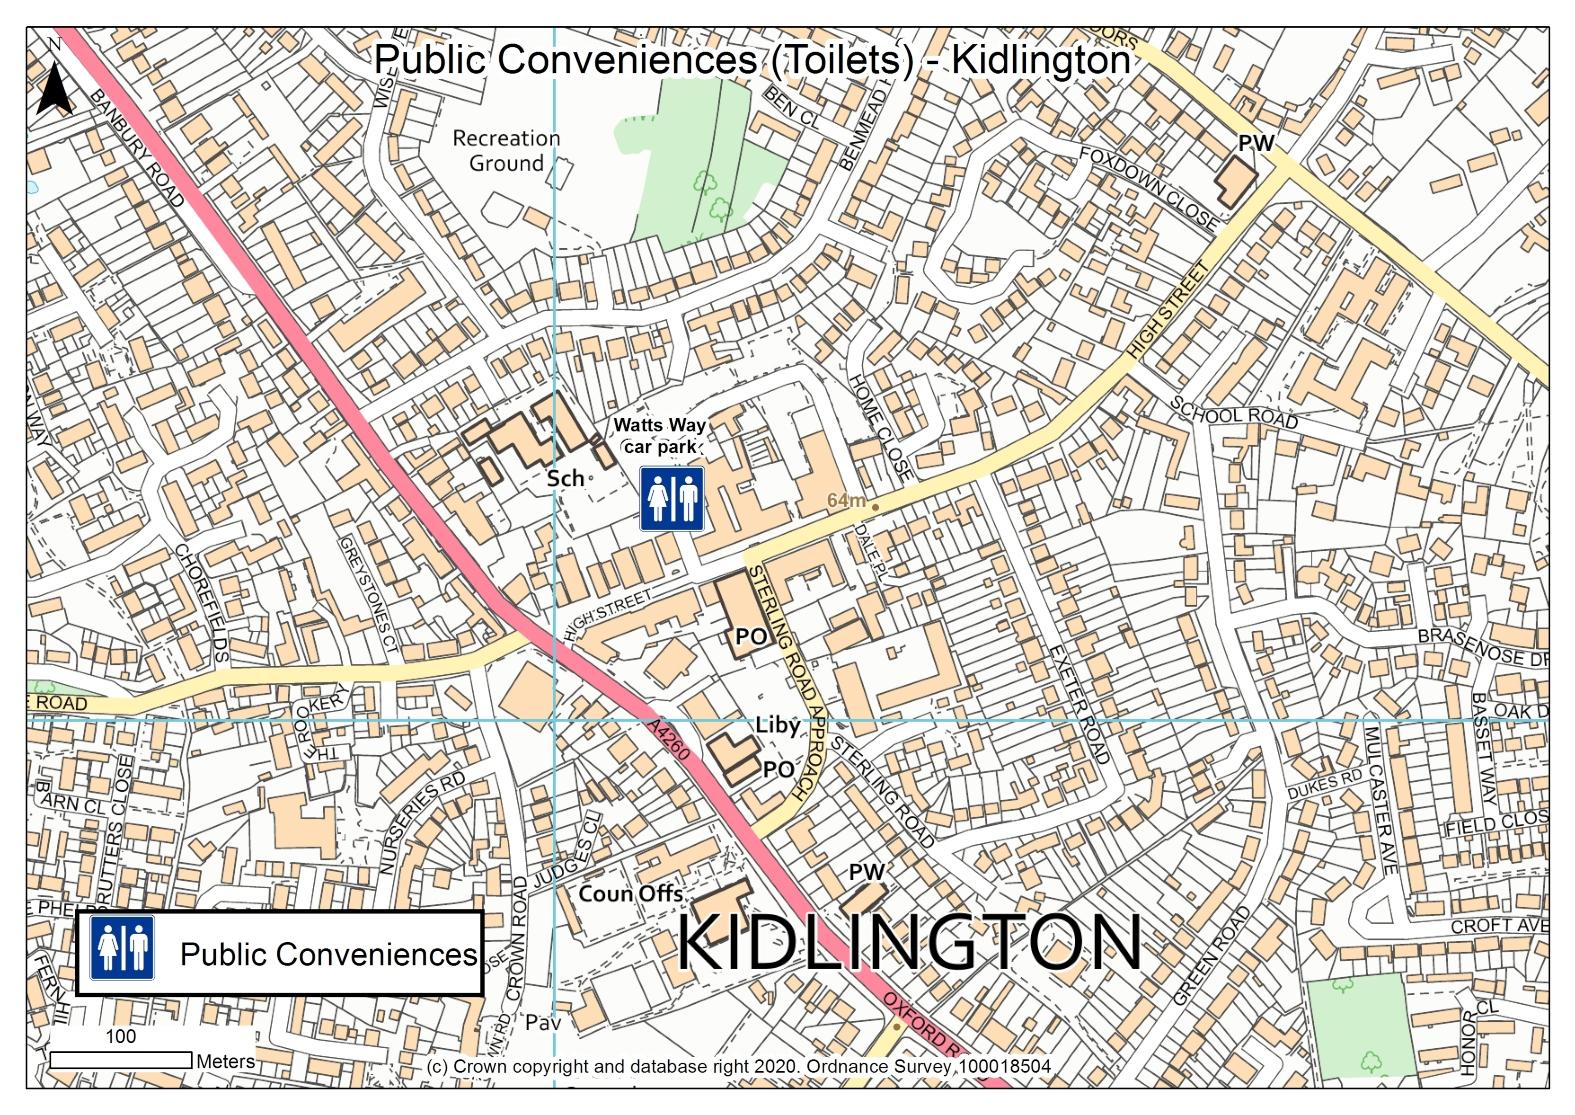 Map of Kidlington showing location of public toilets